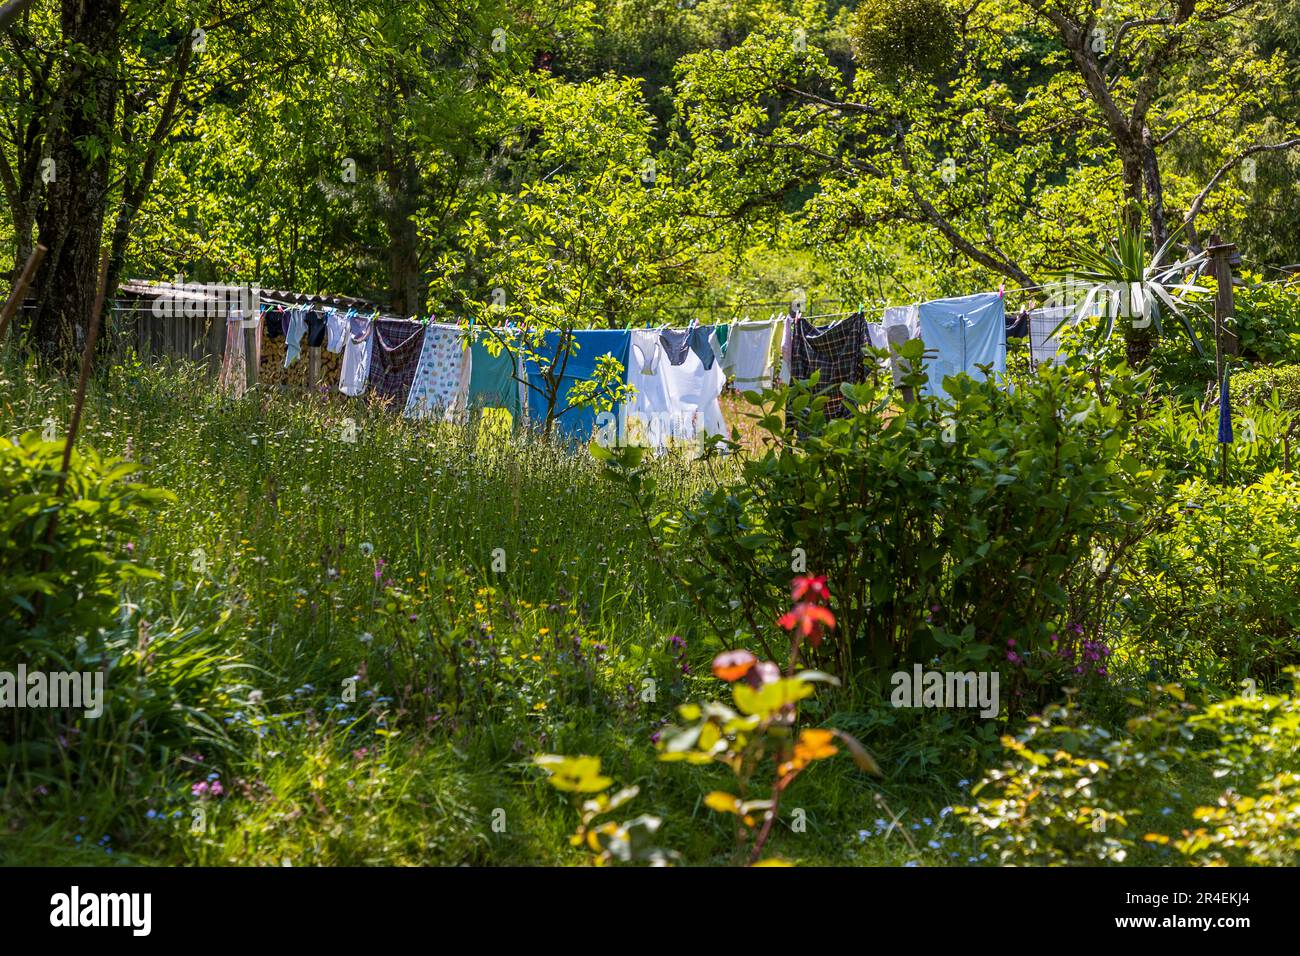 Laundry hangs on the line in a wildly sprawling garden in Salzburg, Austria Stock Photo